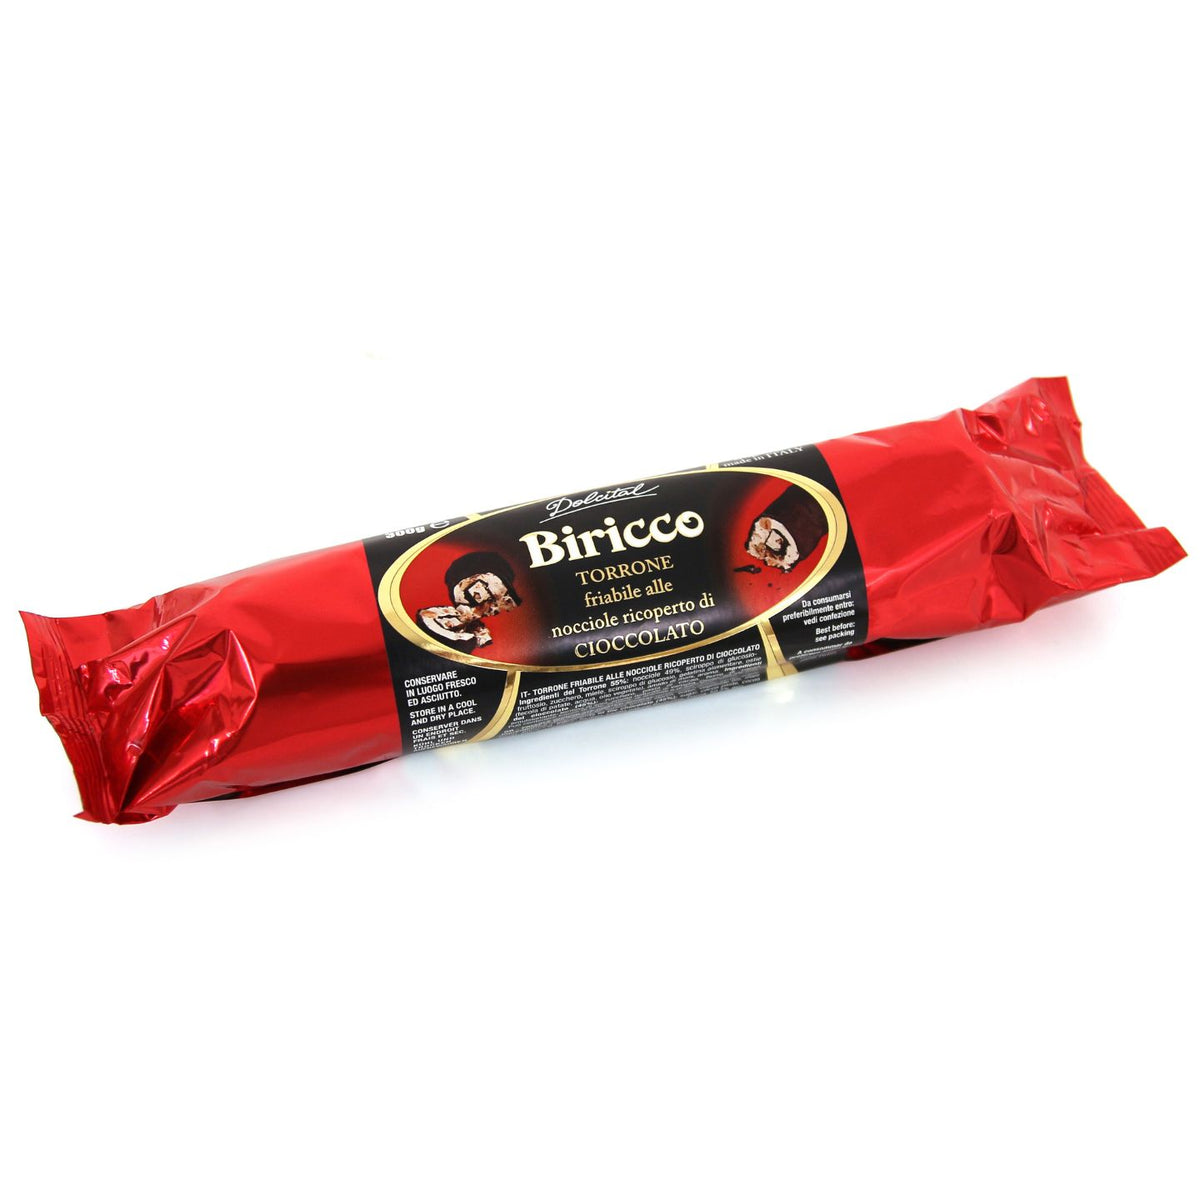 Dolcital Chocolate covered Nougat with Hazelnuts 300g  | Imported and distributed in the UK by Just Gourmet Foods